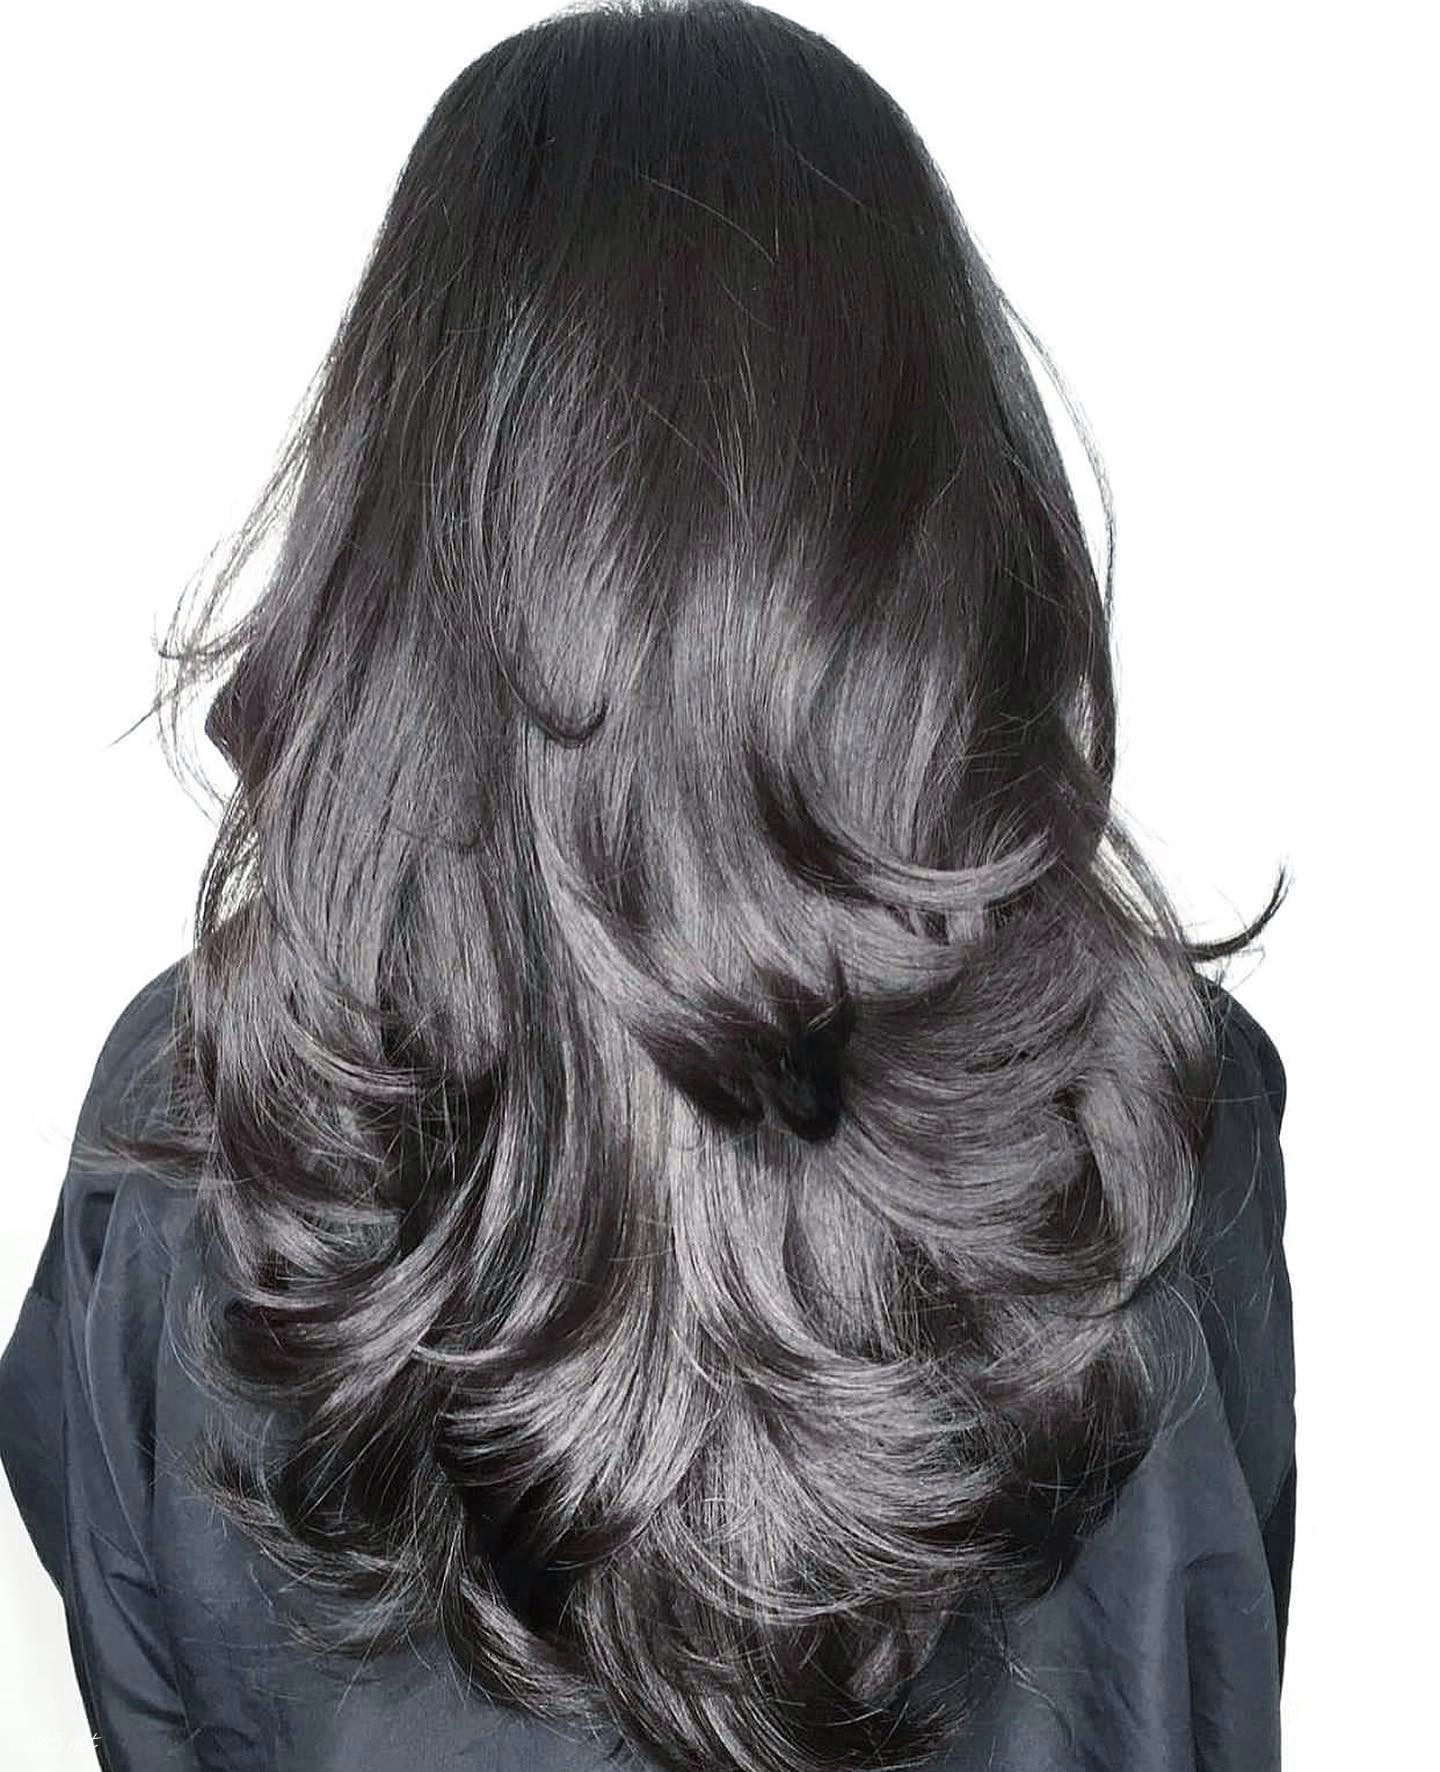 Black Shiny Hairstyle Layered Look